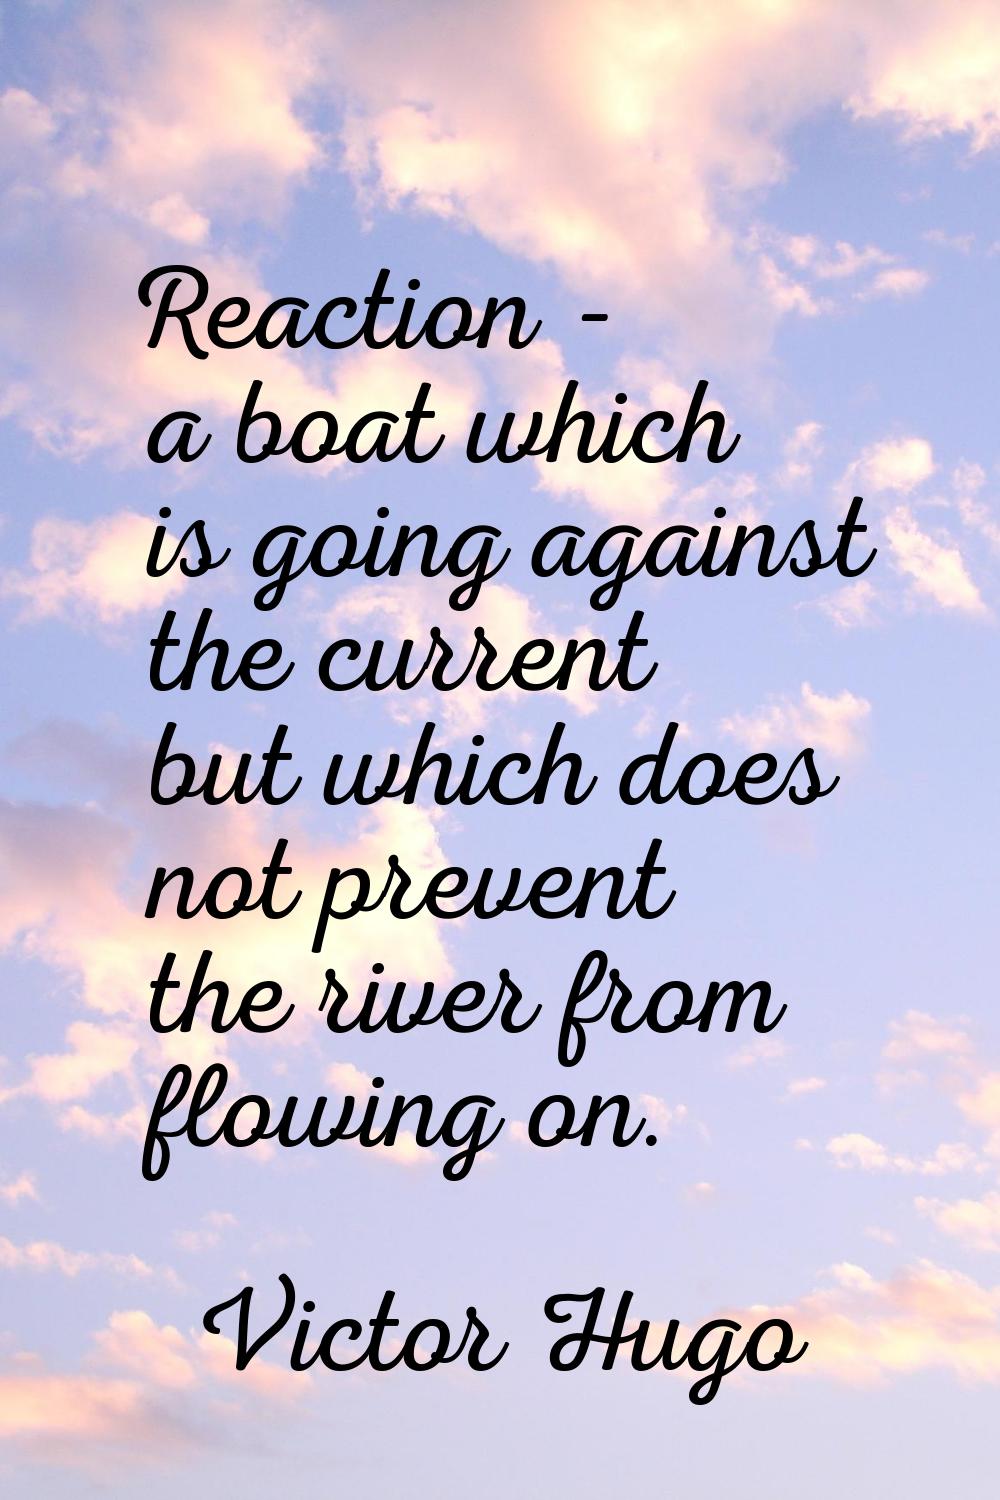 Reaction - a boat which is going against the current but which does not prevent the river from flow